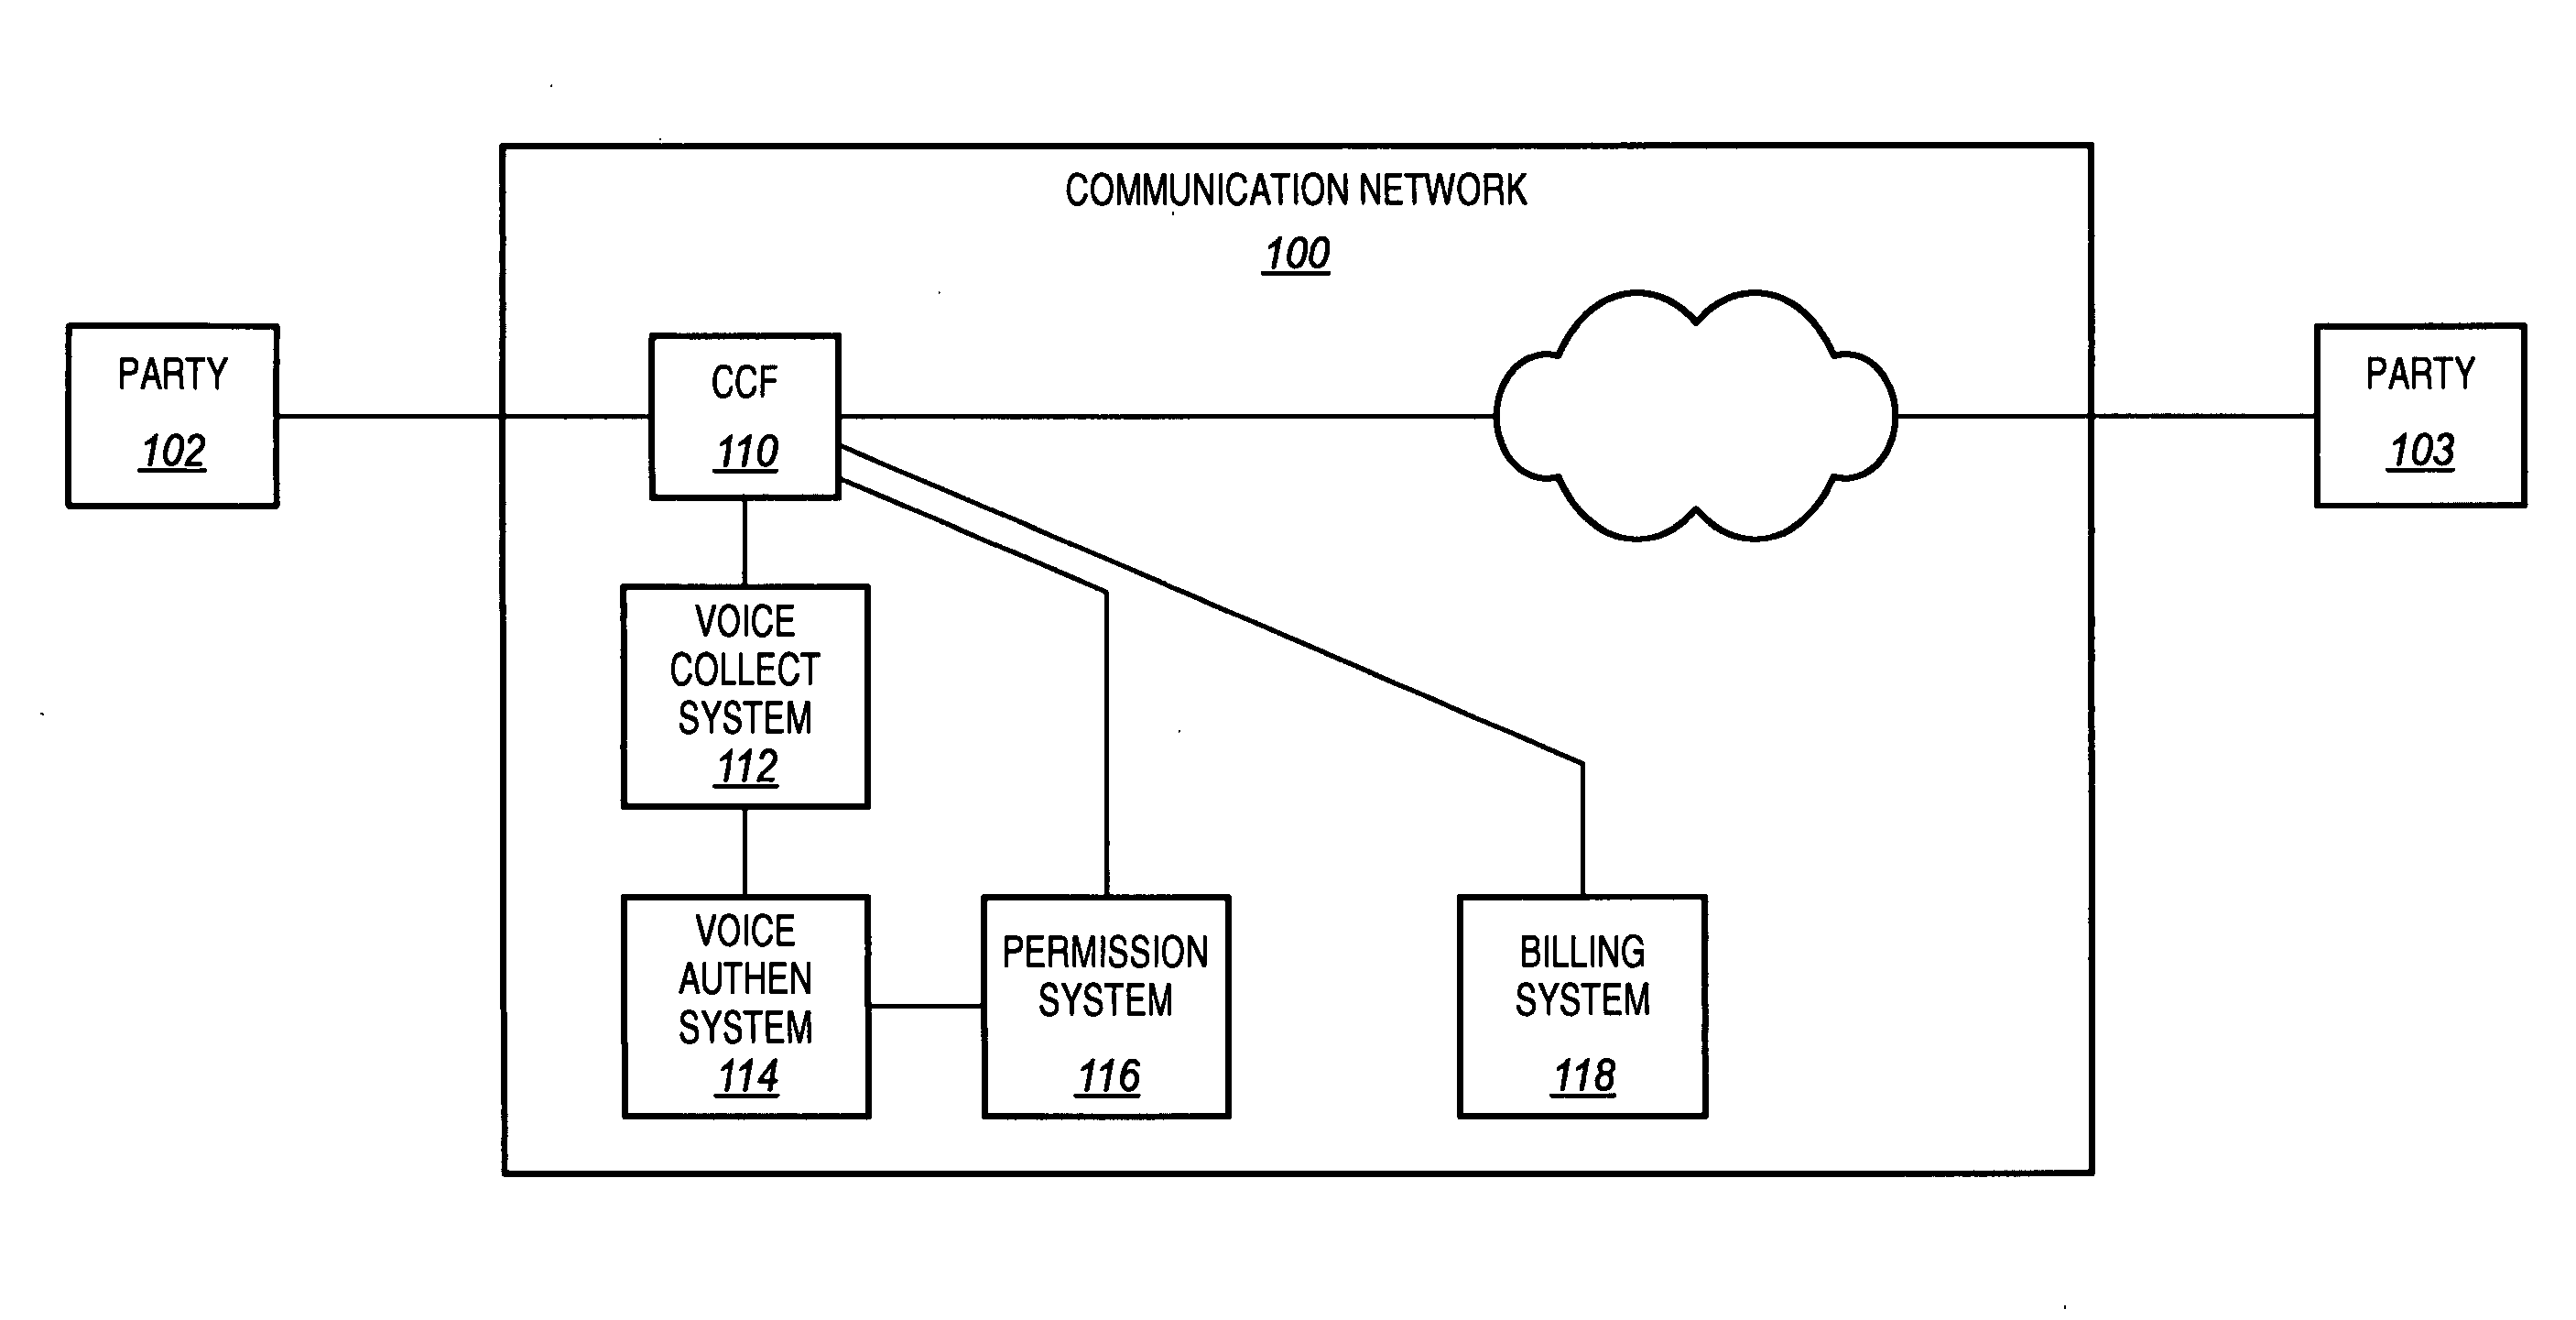 Voice authentication for call control